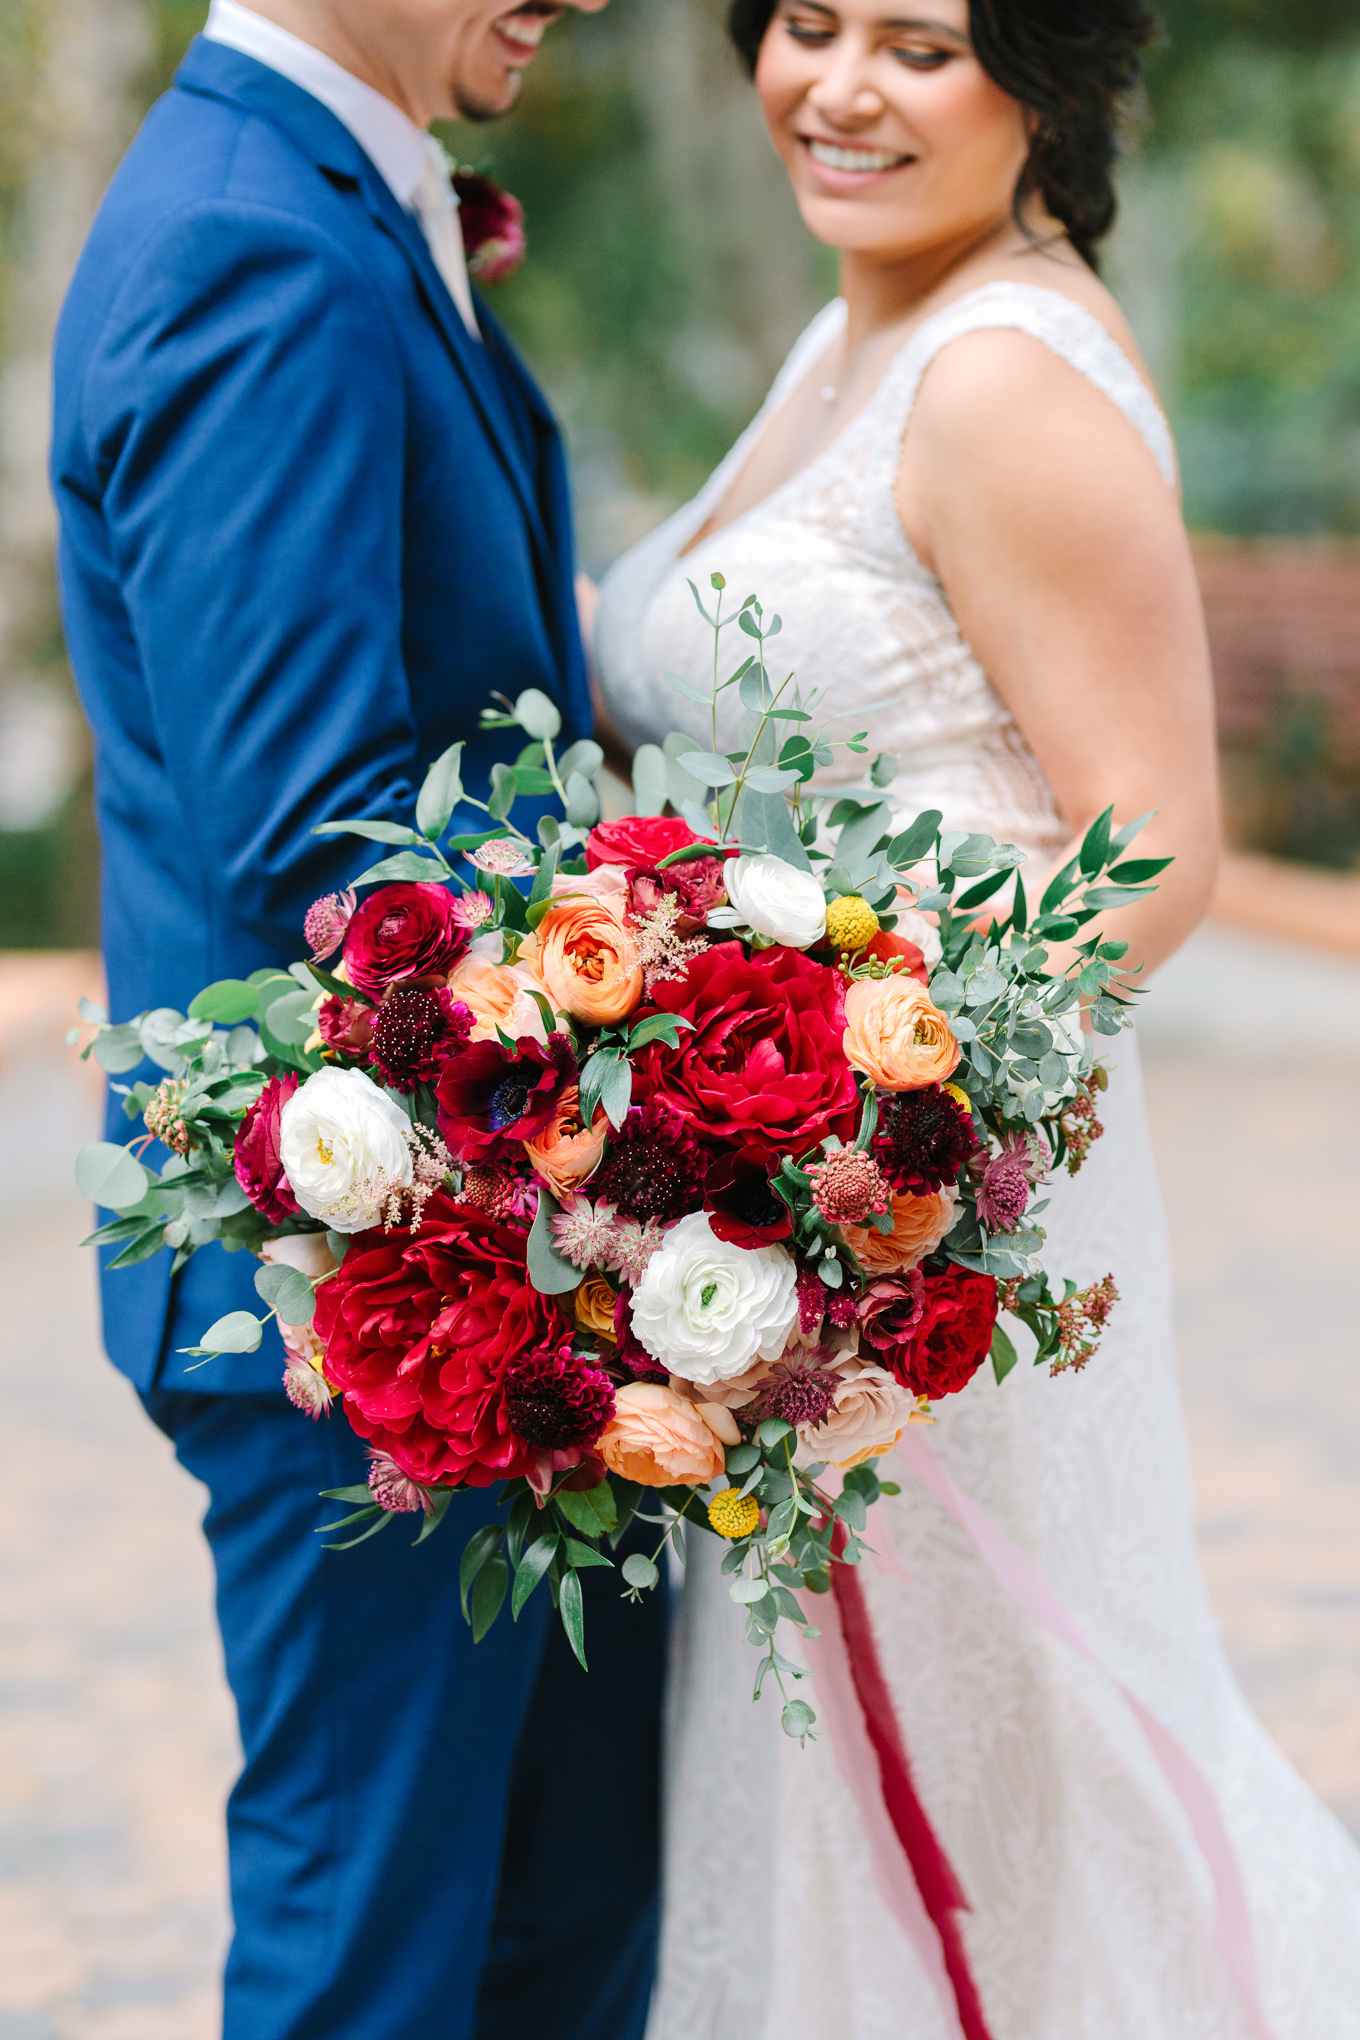 Lush red bridal bouquet at Rancho Las Lomas | Beautiful bridal bouquet inspiration and advice | Colorful and elevated wedding photography for fun-loving couples in Southern California | #weddingflowers #weddingbouquet #bridebouquet #bouquetideas #uniquebouquet   Source: Mary Costa Photography | Los Angeles